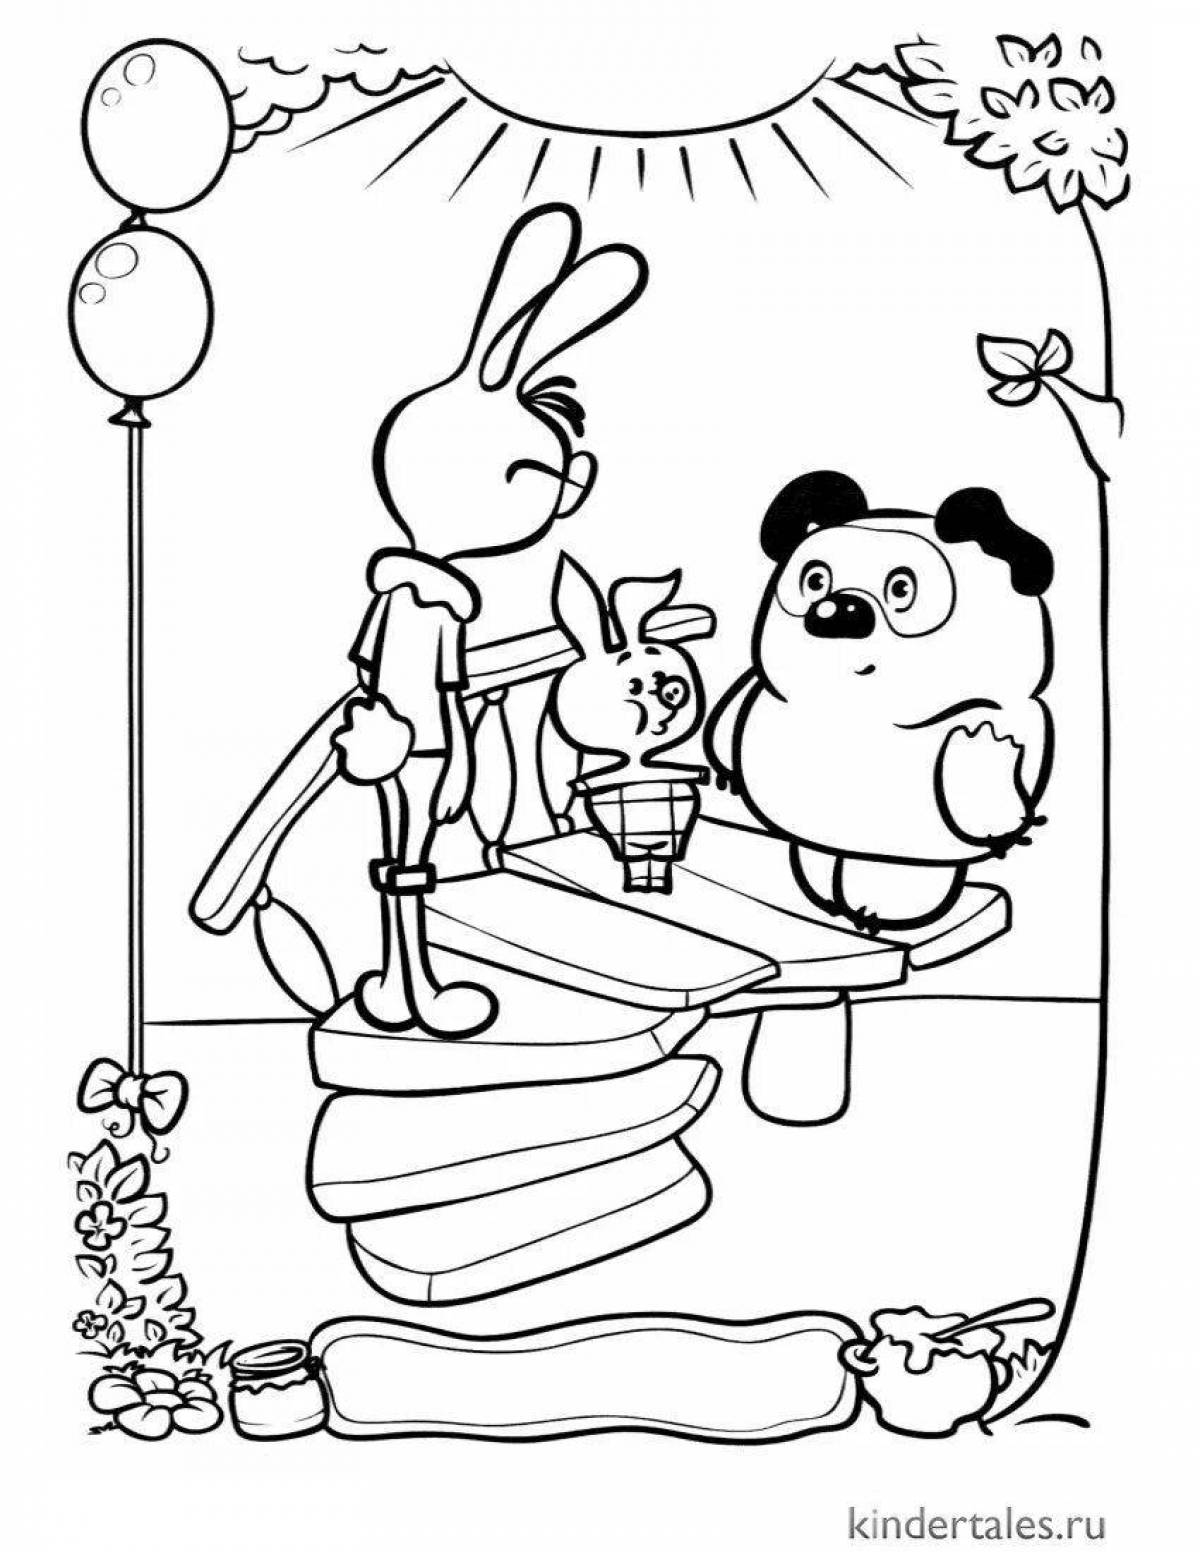 Coloring page joyful winnie the pooh and his friends